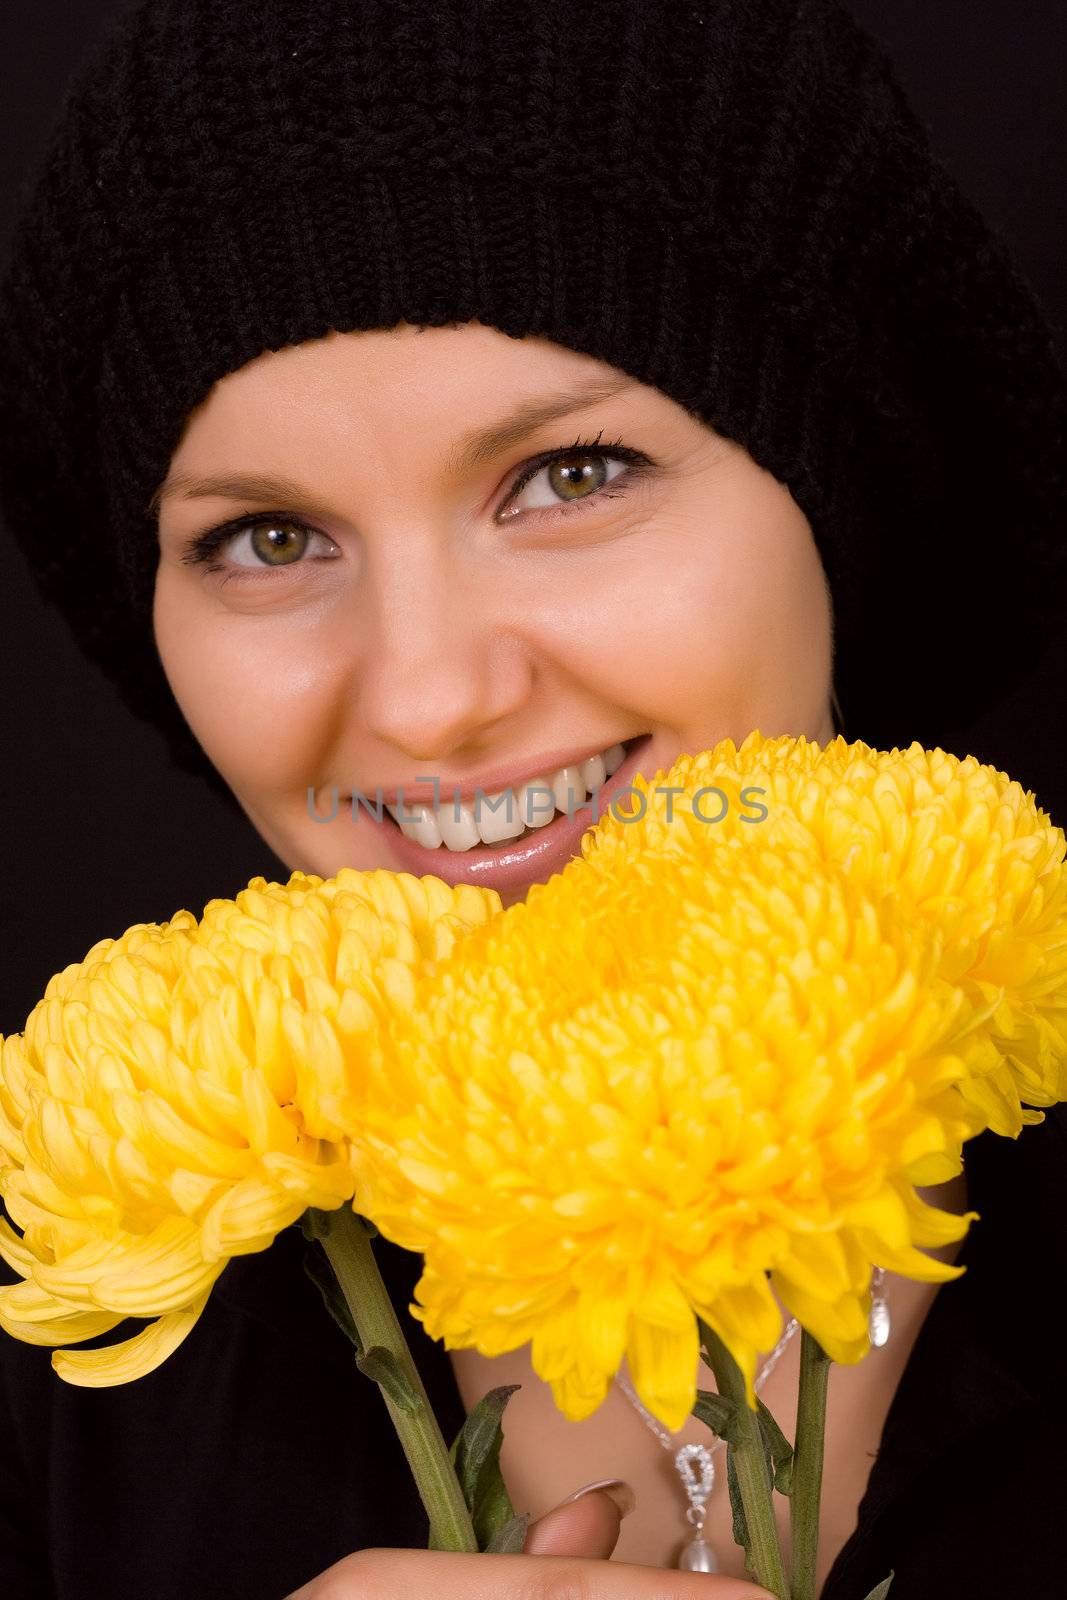 Romantic image of a young woman with yellow chrysanthemums
